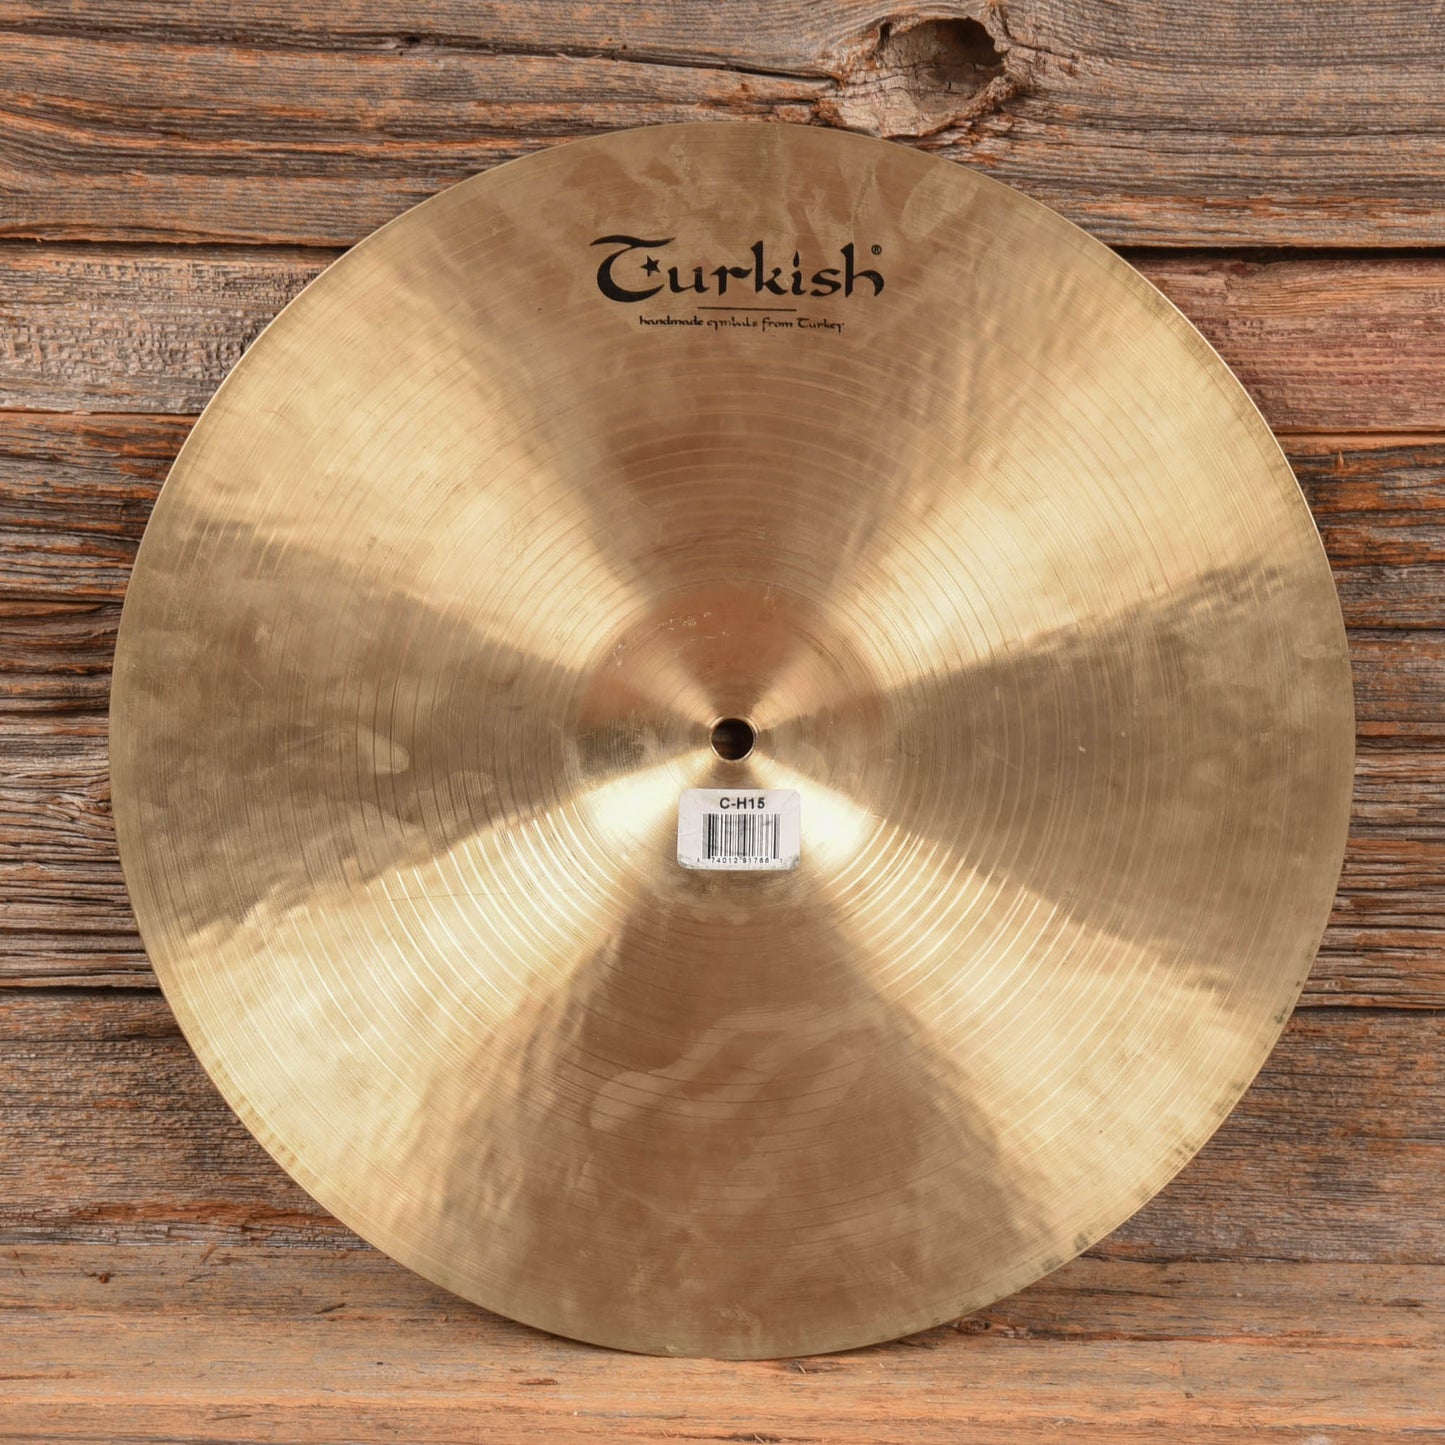 Turkish Cymbals 15" Classic Hi-Hats Pair USED Drums and Percussion